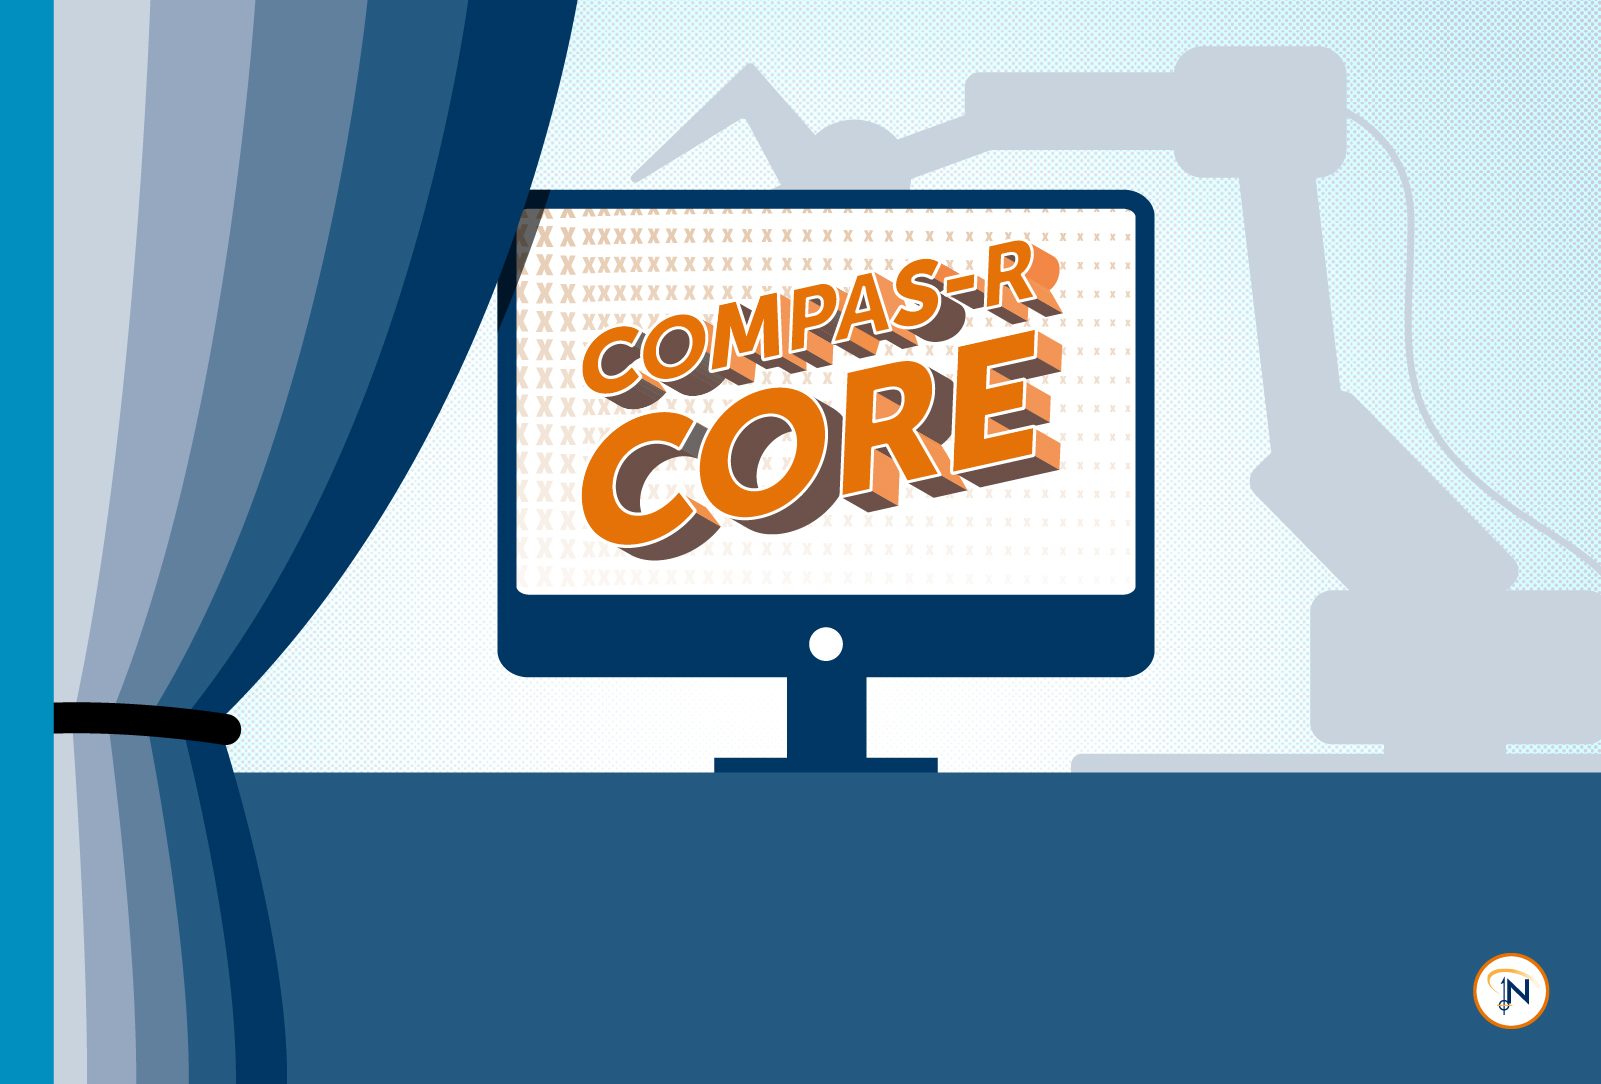 Behind-the-Scenes: The Making of the COMPAS-R Core